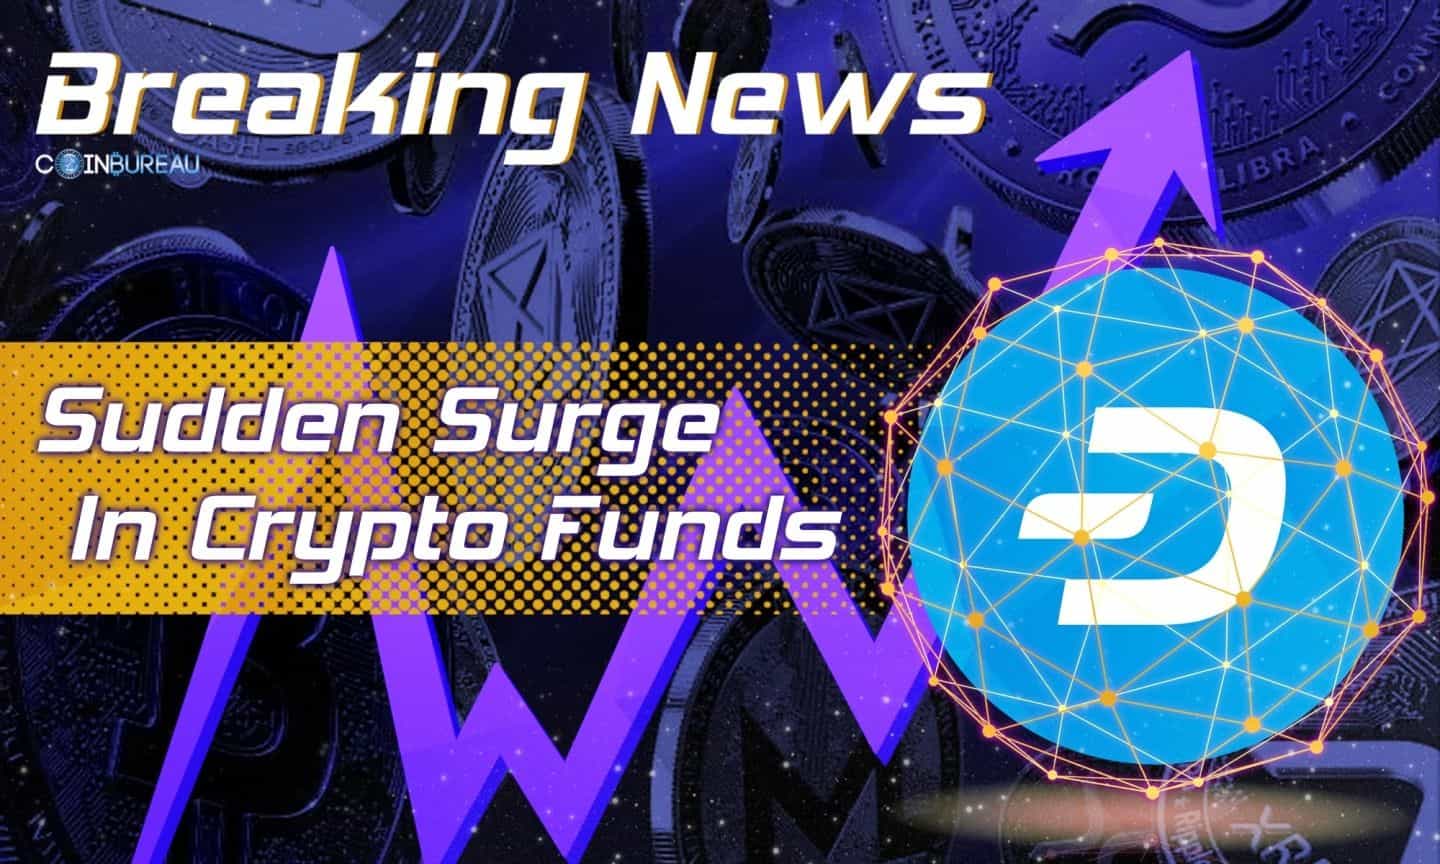 Sudden Surge In Crypto Funds Looking to Invest In DASH: Report